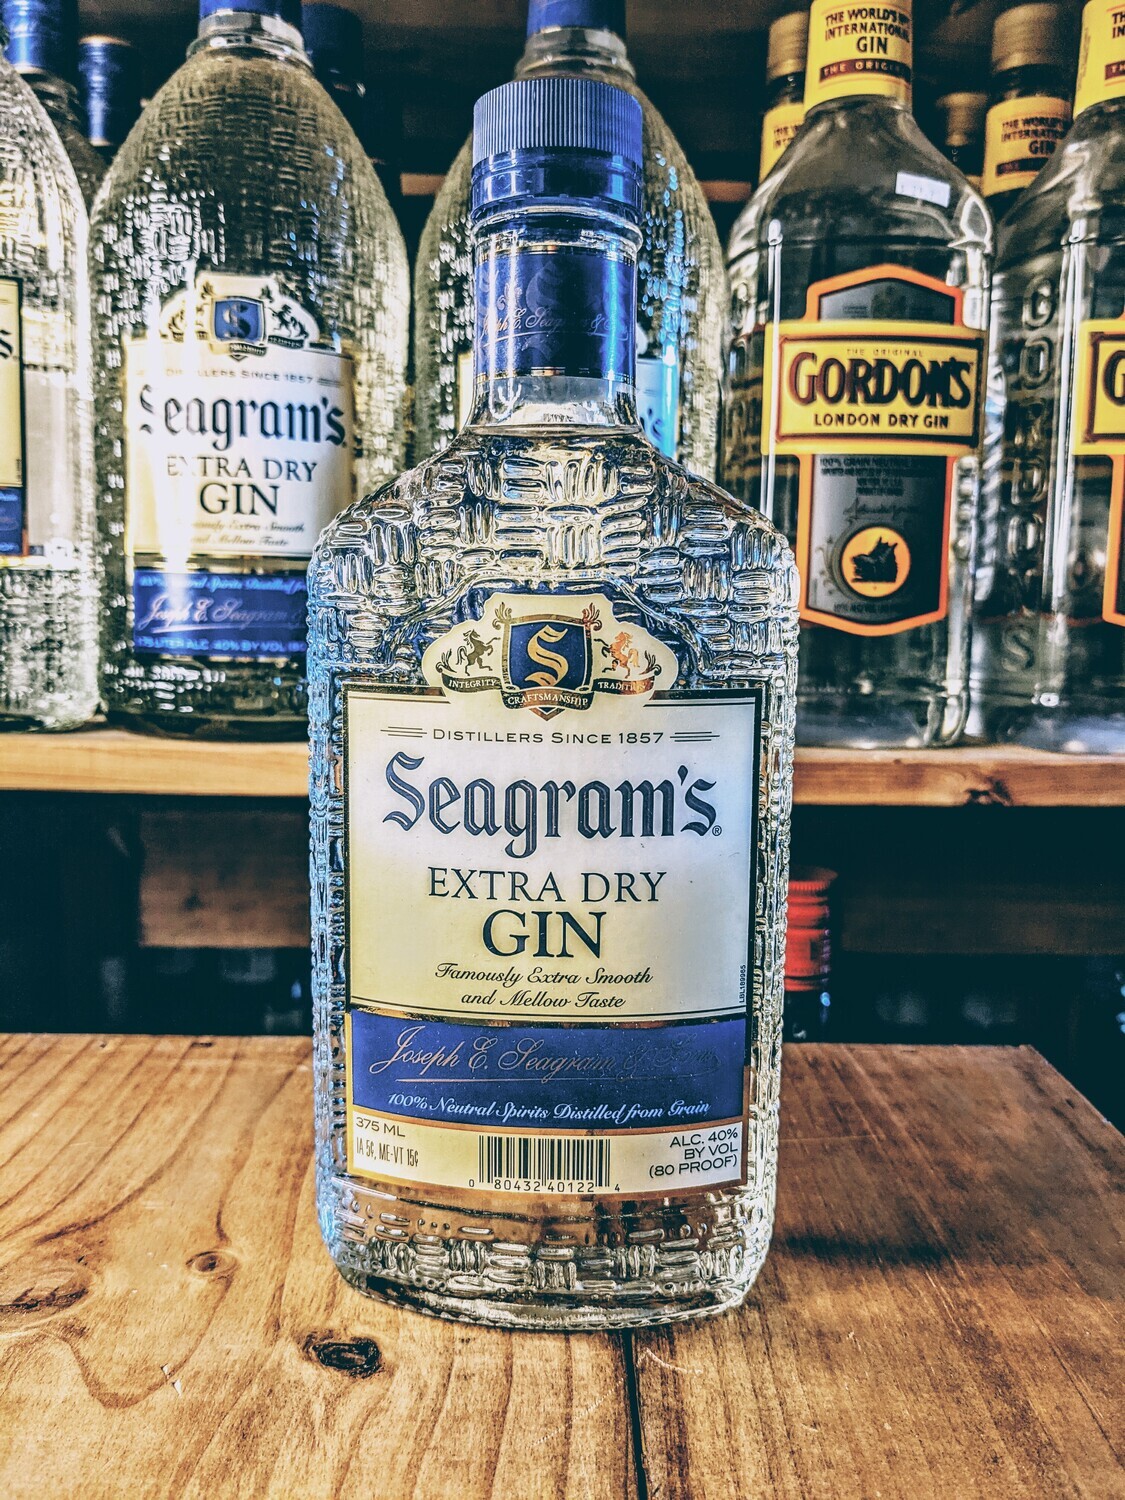 Seagrams Extra Dry Gin 375